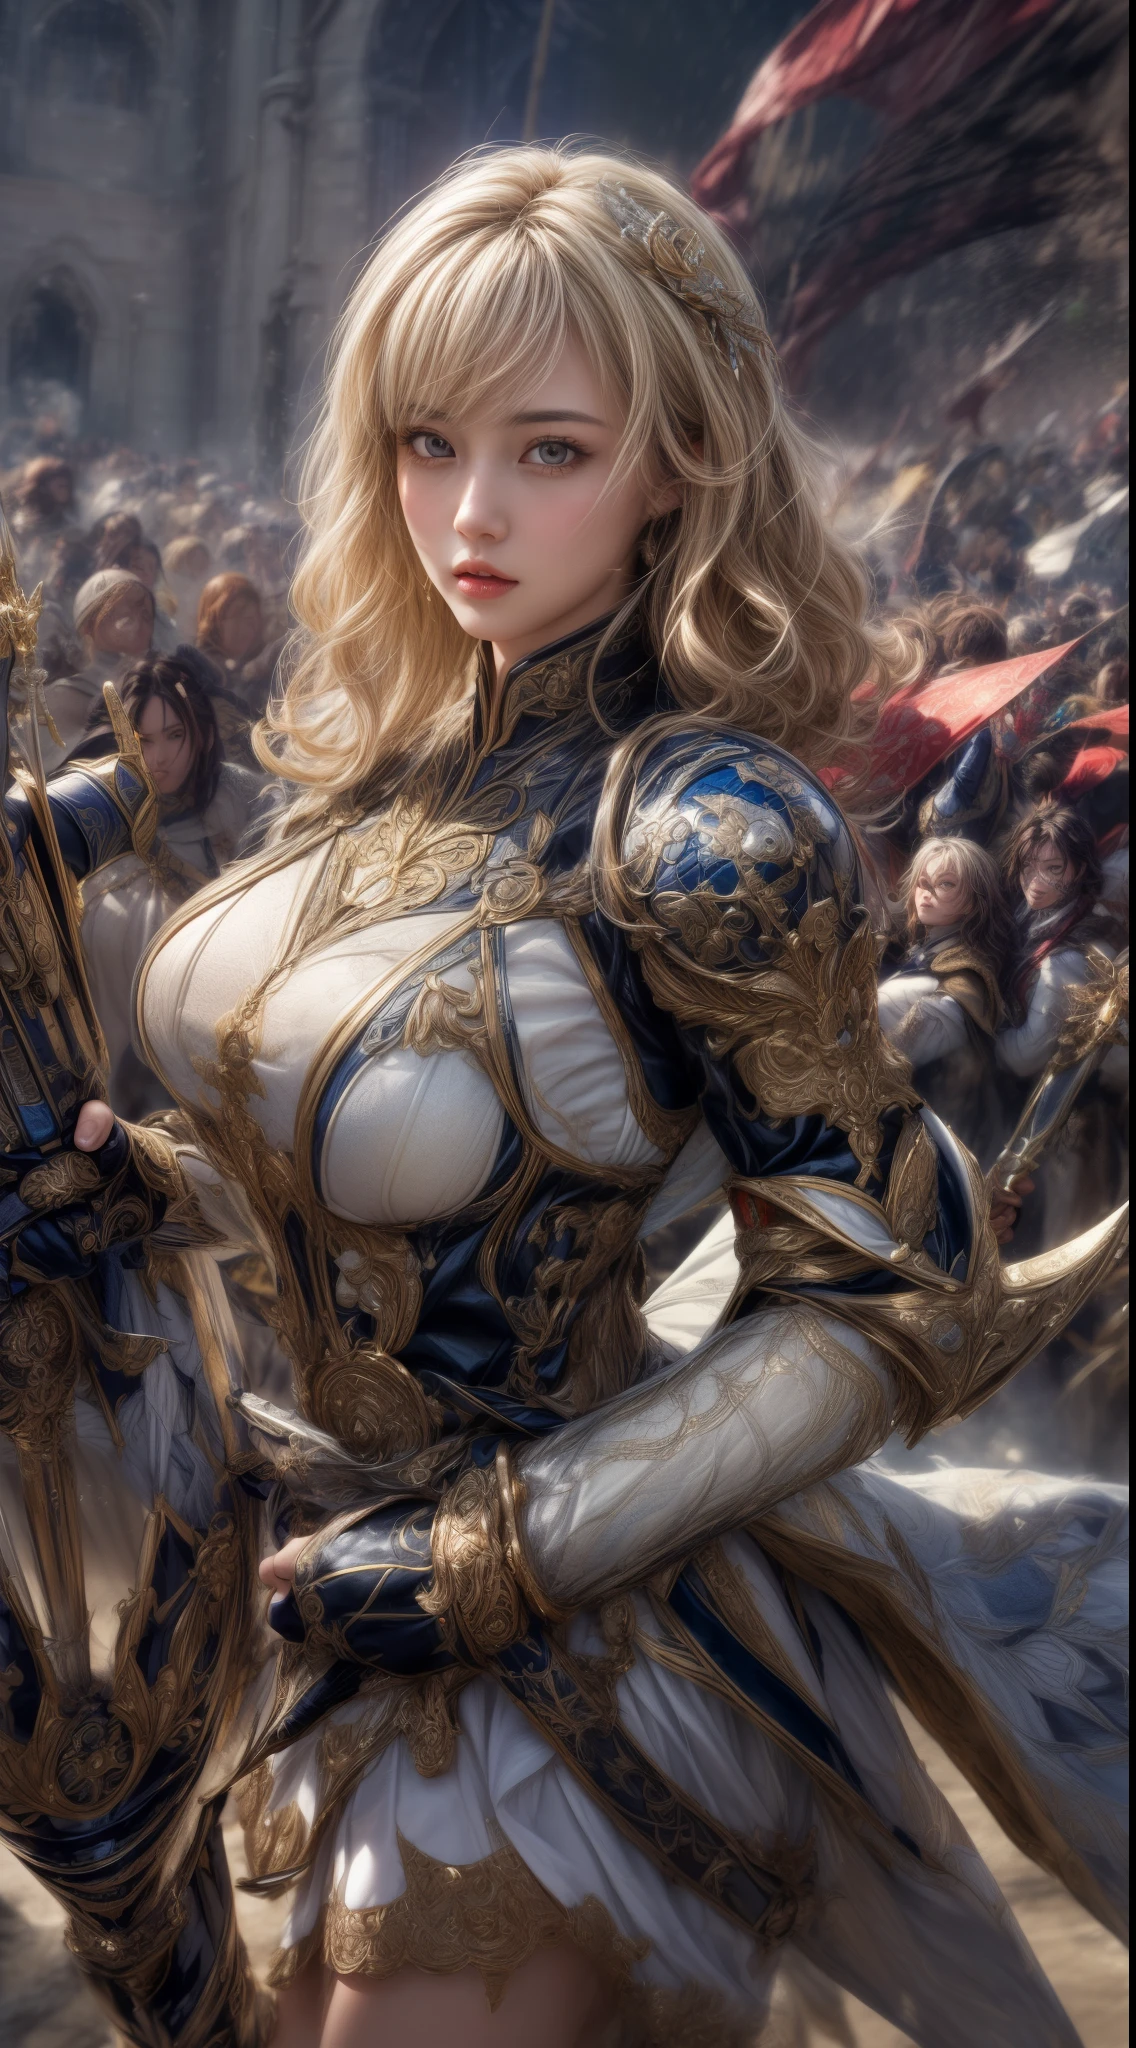 Very beautiful woman、Slender women、(Detailed face)、Realistic Skin、((holy knight)), ((Pearl White Armor))、((((Black armor with very fine and intricate decoration:1.1))))、((Delicate photo))，(Girl Astepeace RAW Photo Details:1.25), (highest quality:1.6), (超A high resolution:1.5), (Realistic:1.75), 8K resolution, Canon EOS R5, 50mm, Absurd, Ultra-detailed,Cinema Lighting,((battlefield))、((battle))、(((White skirt with embellishments)))、Thigh-high socks、Shin Guards、((Blonde))、((Curly Hair))、((Drill Hair))、((Wavy short hair with bangs,))、Get six-pack、Cape、Beautiful Armor、(((Has a huge weapon)))、(In combat)、The wind is blowing、((Symmetrical Armor))、((((Blizzard))))、(((Leading a large group of knights:1.2)))、Banner、Armor inspired by the ice goddess